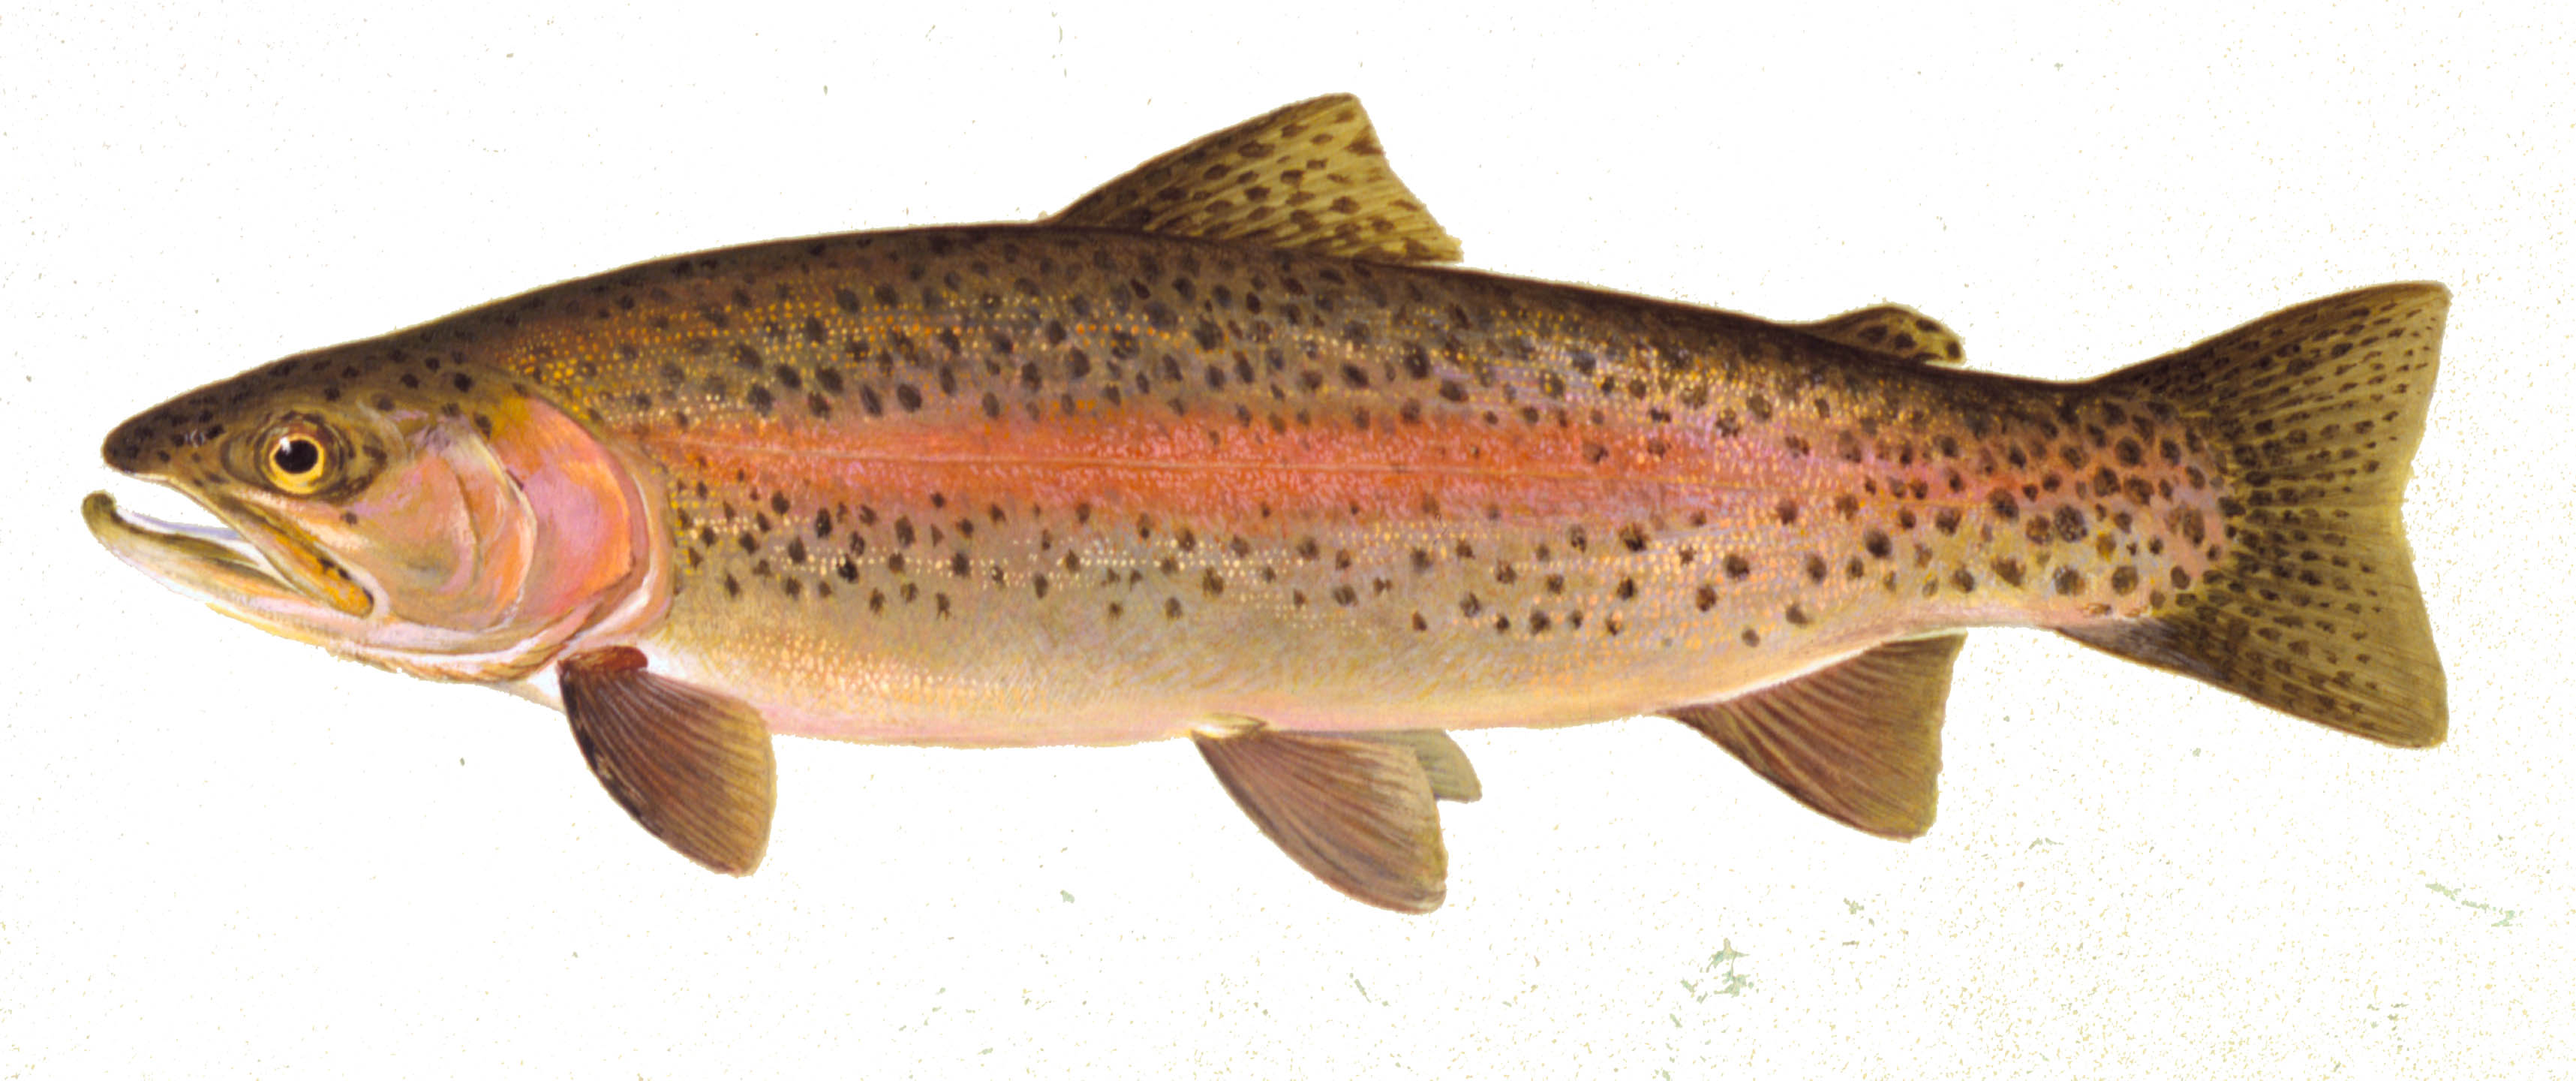 A trout must grow about 15 months before reaching a size suitable for stocking.